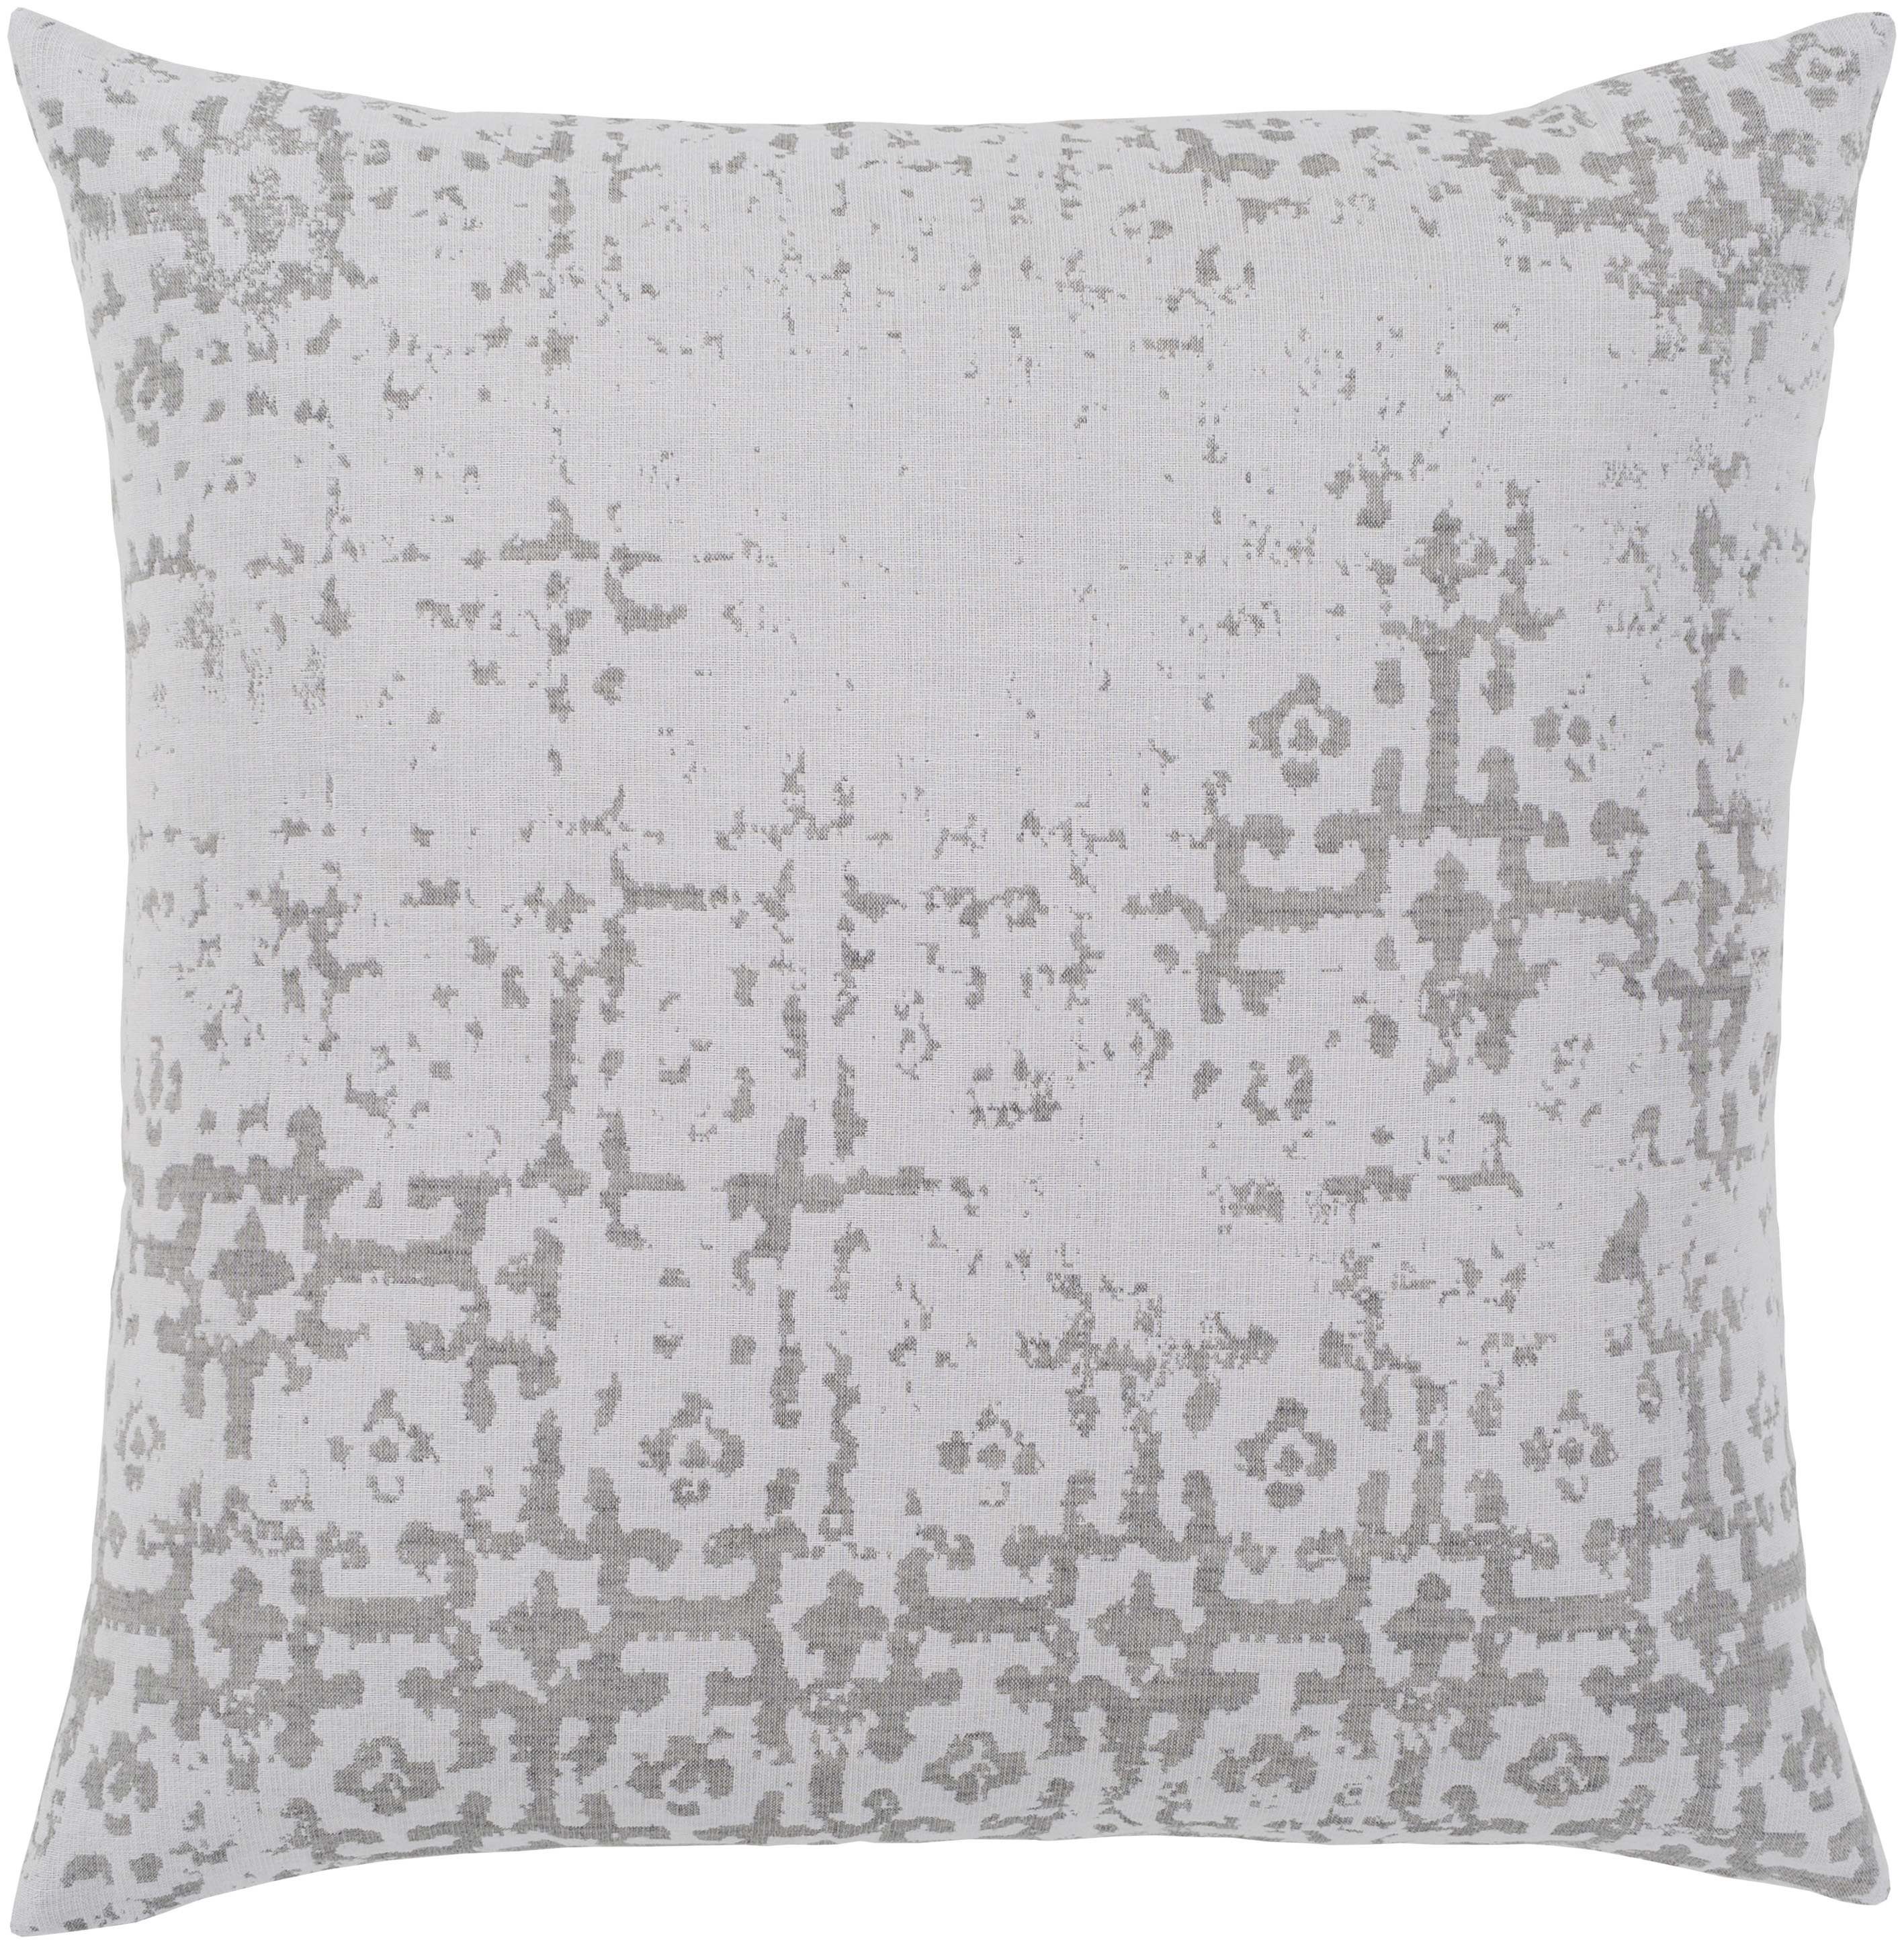 Abstraction Throw Pillow, 18" x 18", with down insert - Image 0